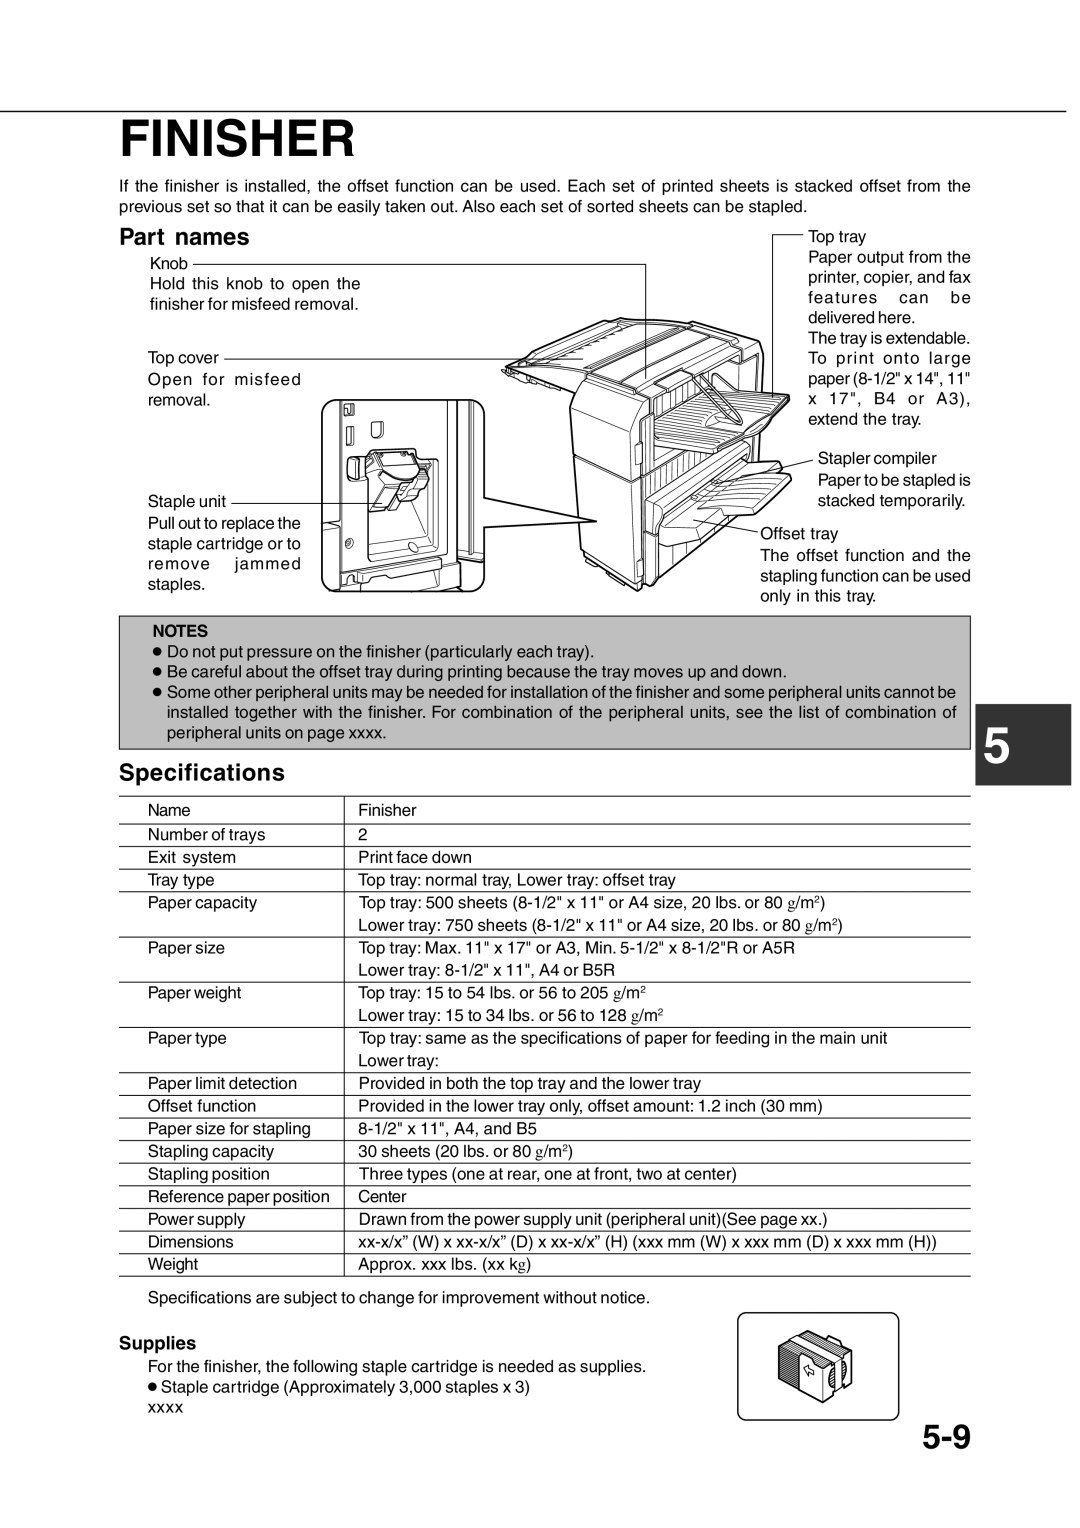 Sharp AR-350, AR_M280 operation manual Finisher, Supplies, Part names, Specifications 